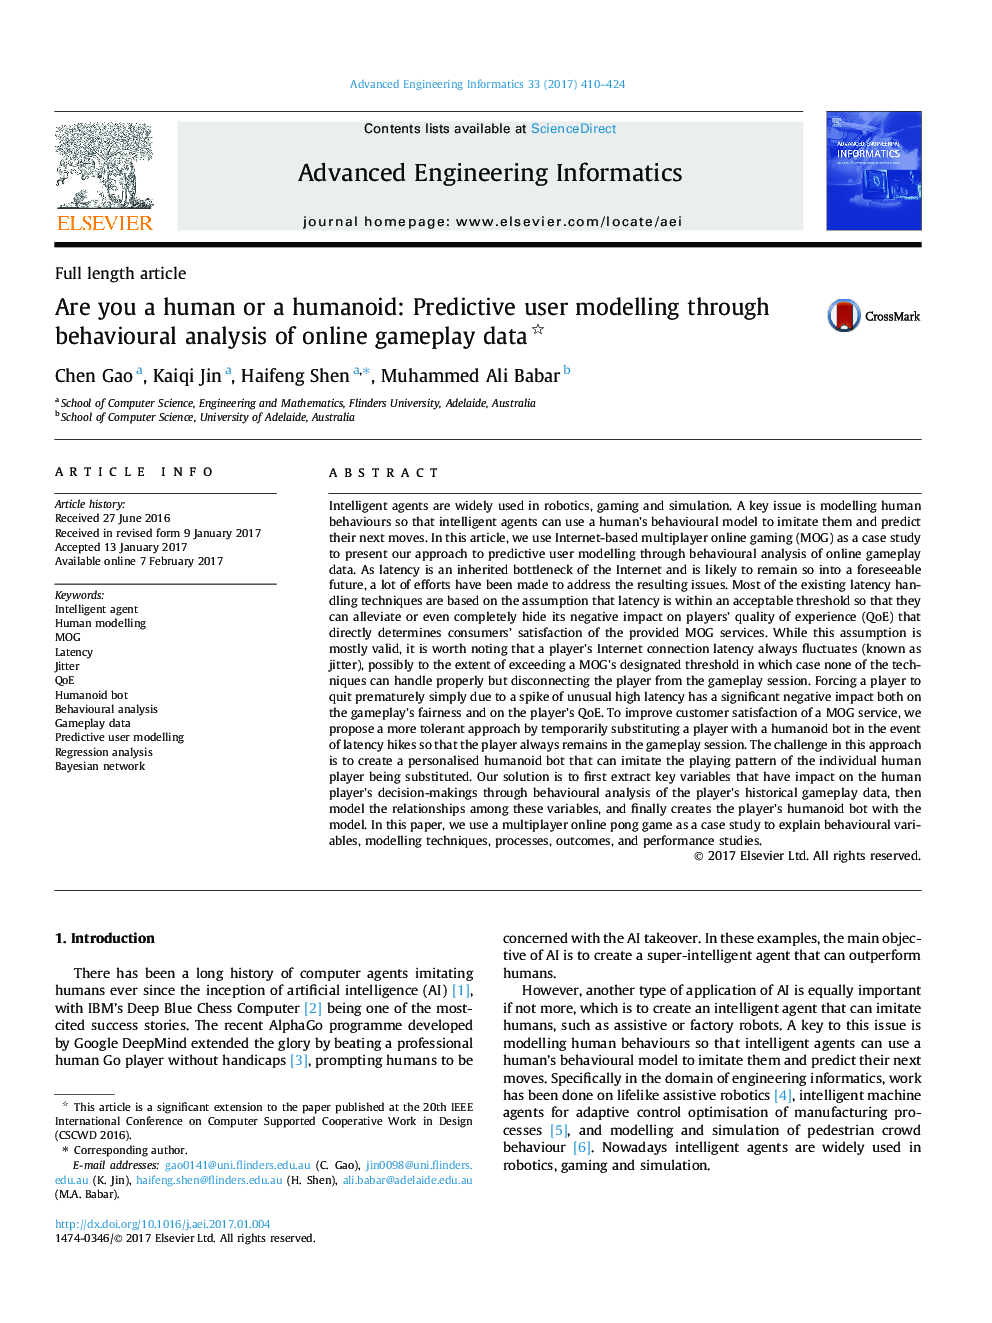 Are you a human or a humanoid: Predictive user modelling through behavioural analysis of online gameplay data